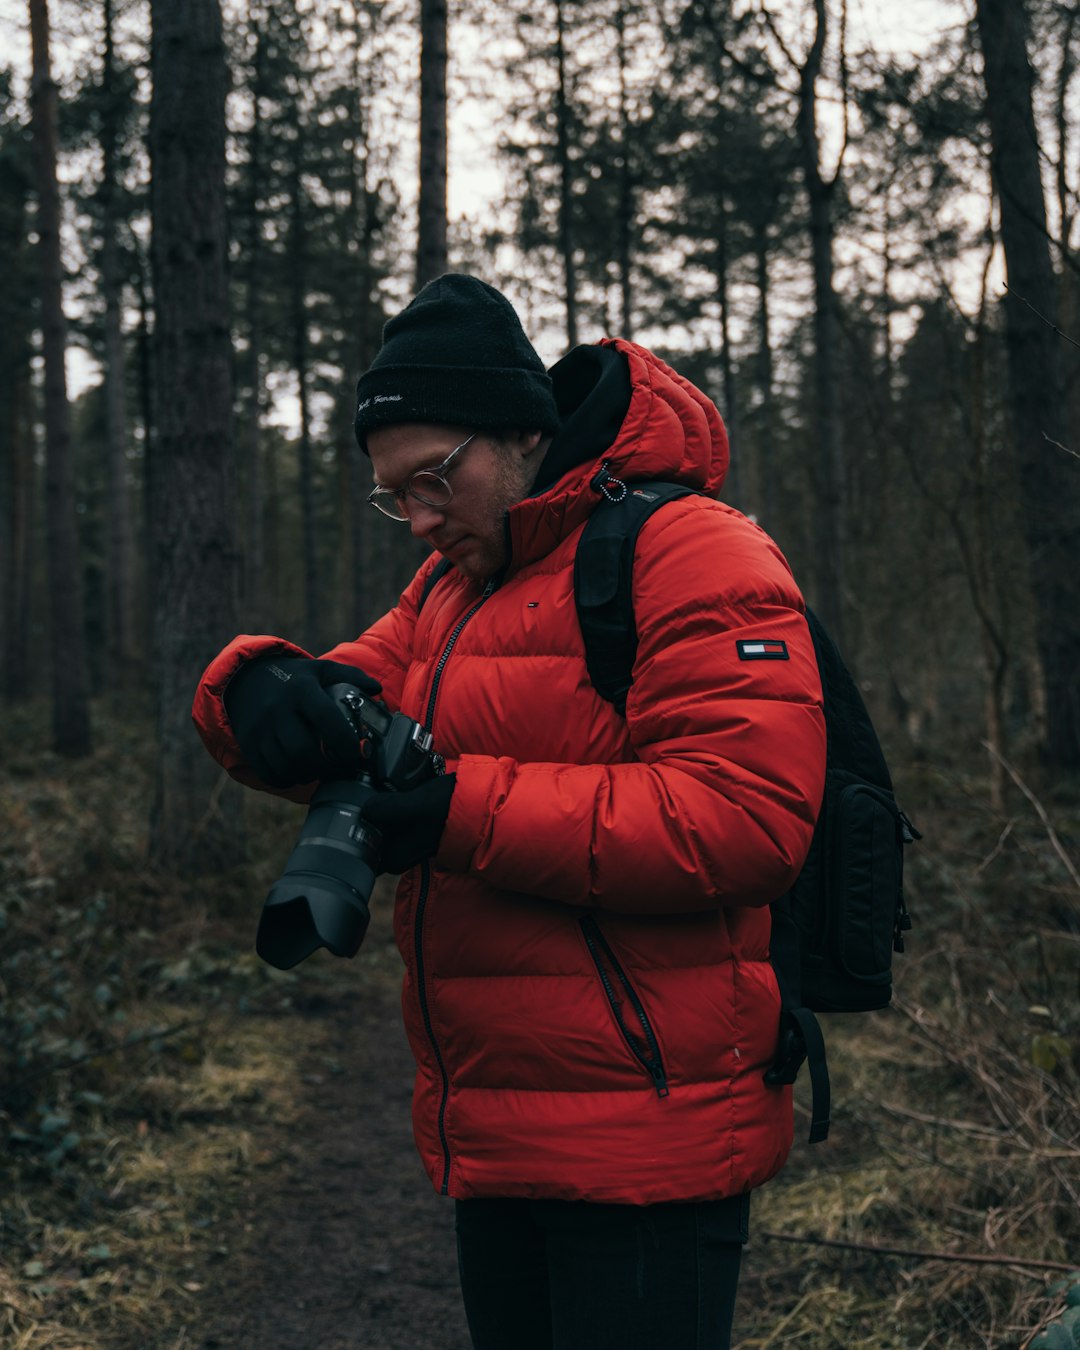 man in red jacket and black knit cap standing in forest during daytime